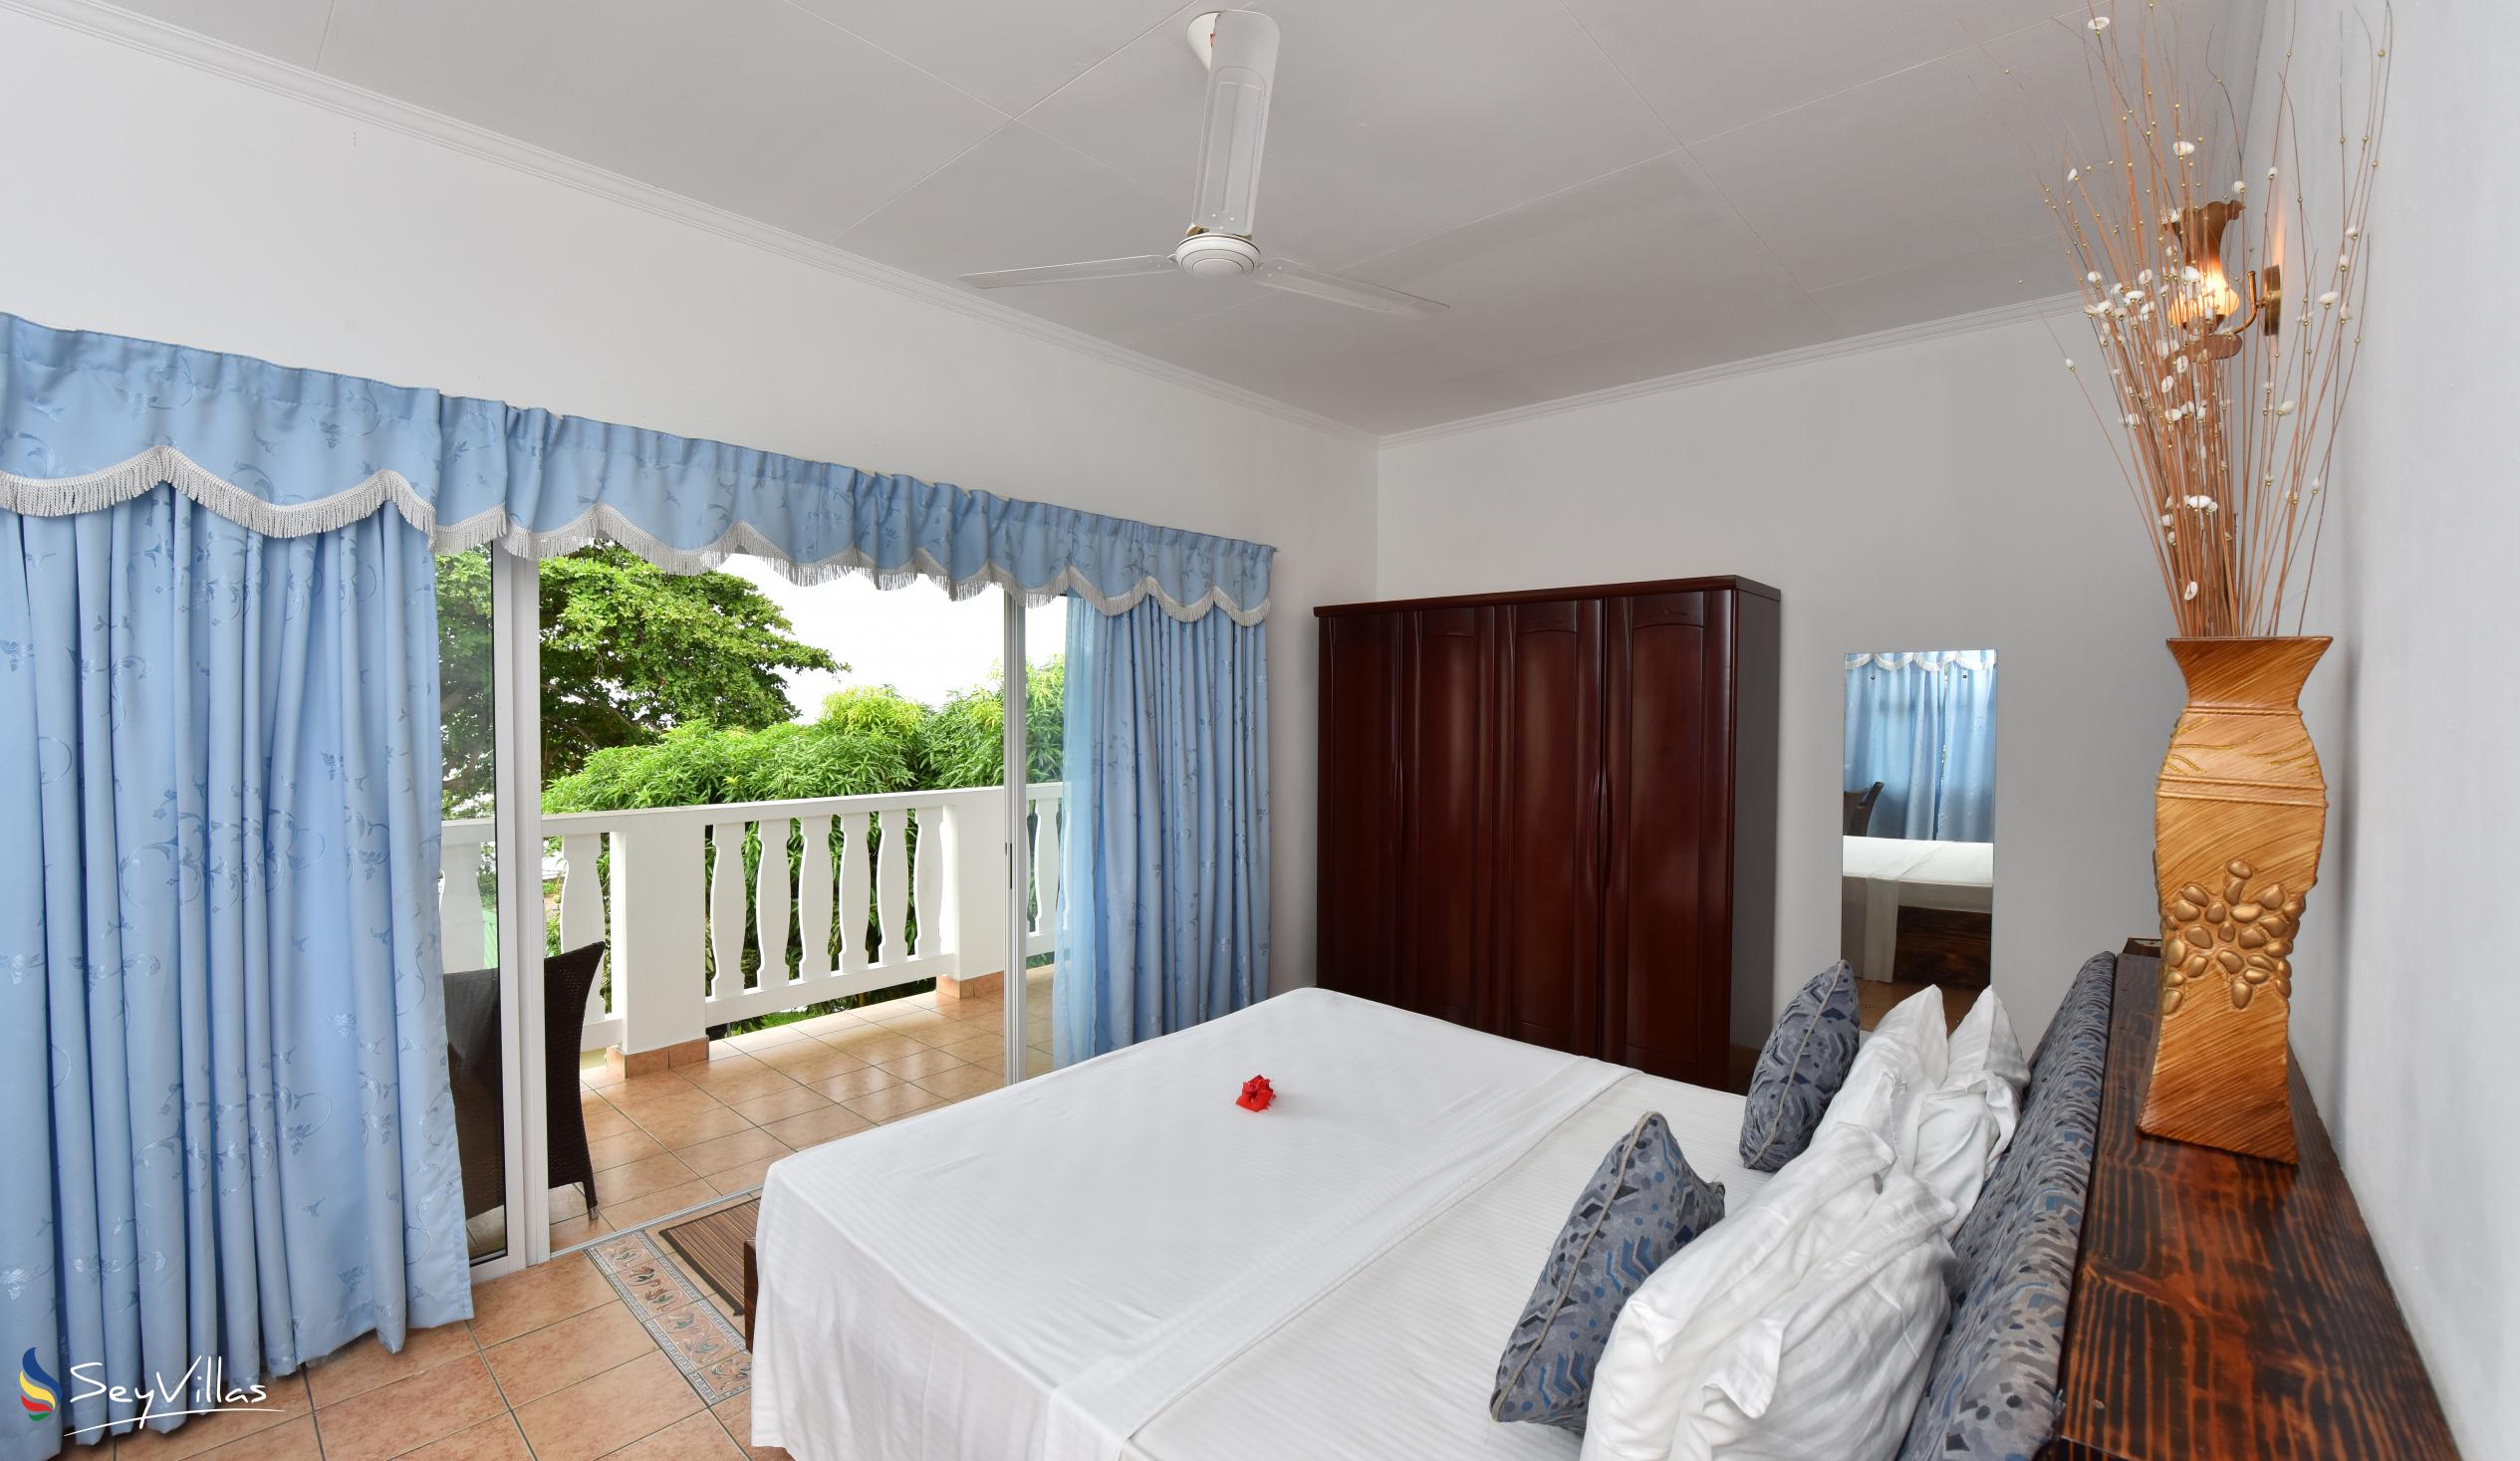 Photo 13: The Diver's Lodge - Standard Room (First Floor) - Mahé (Seychelles)